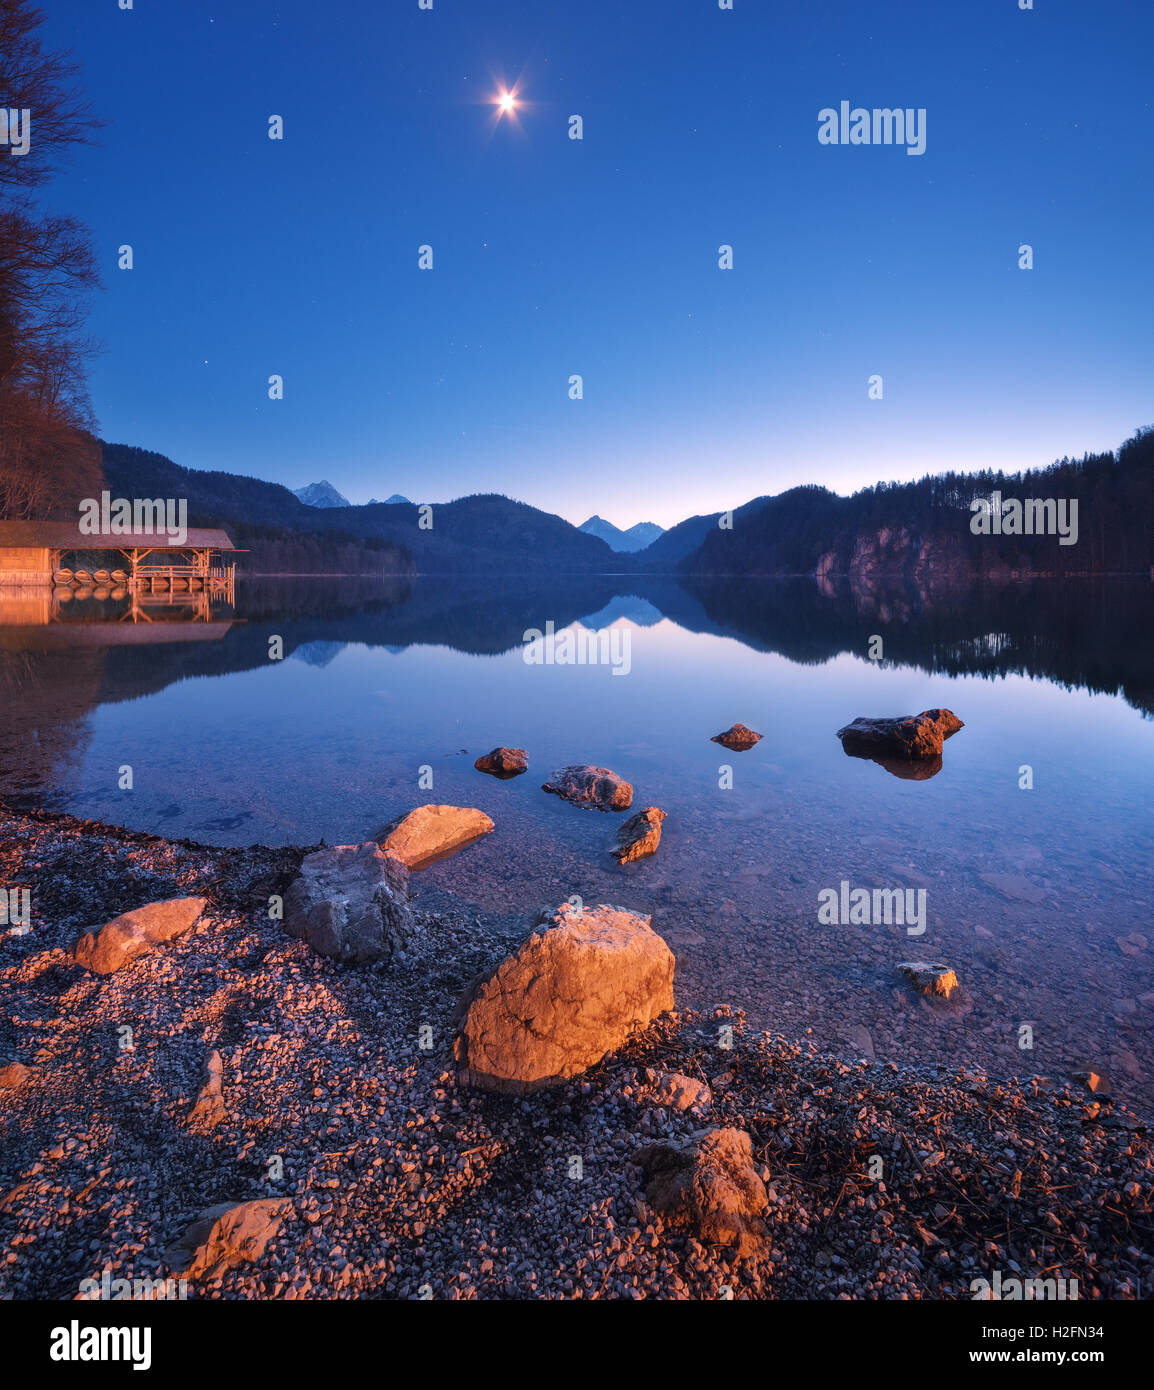 Alpsee lake in Germany at night in spring. Beautiful night landscape with lake, mountains, forest, stars, full moon, sky and sto Stock Photo